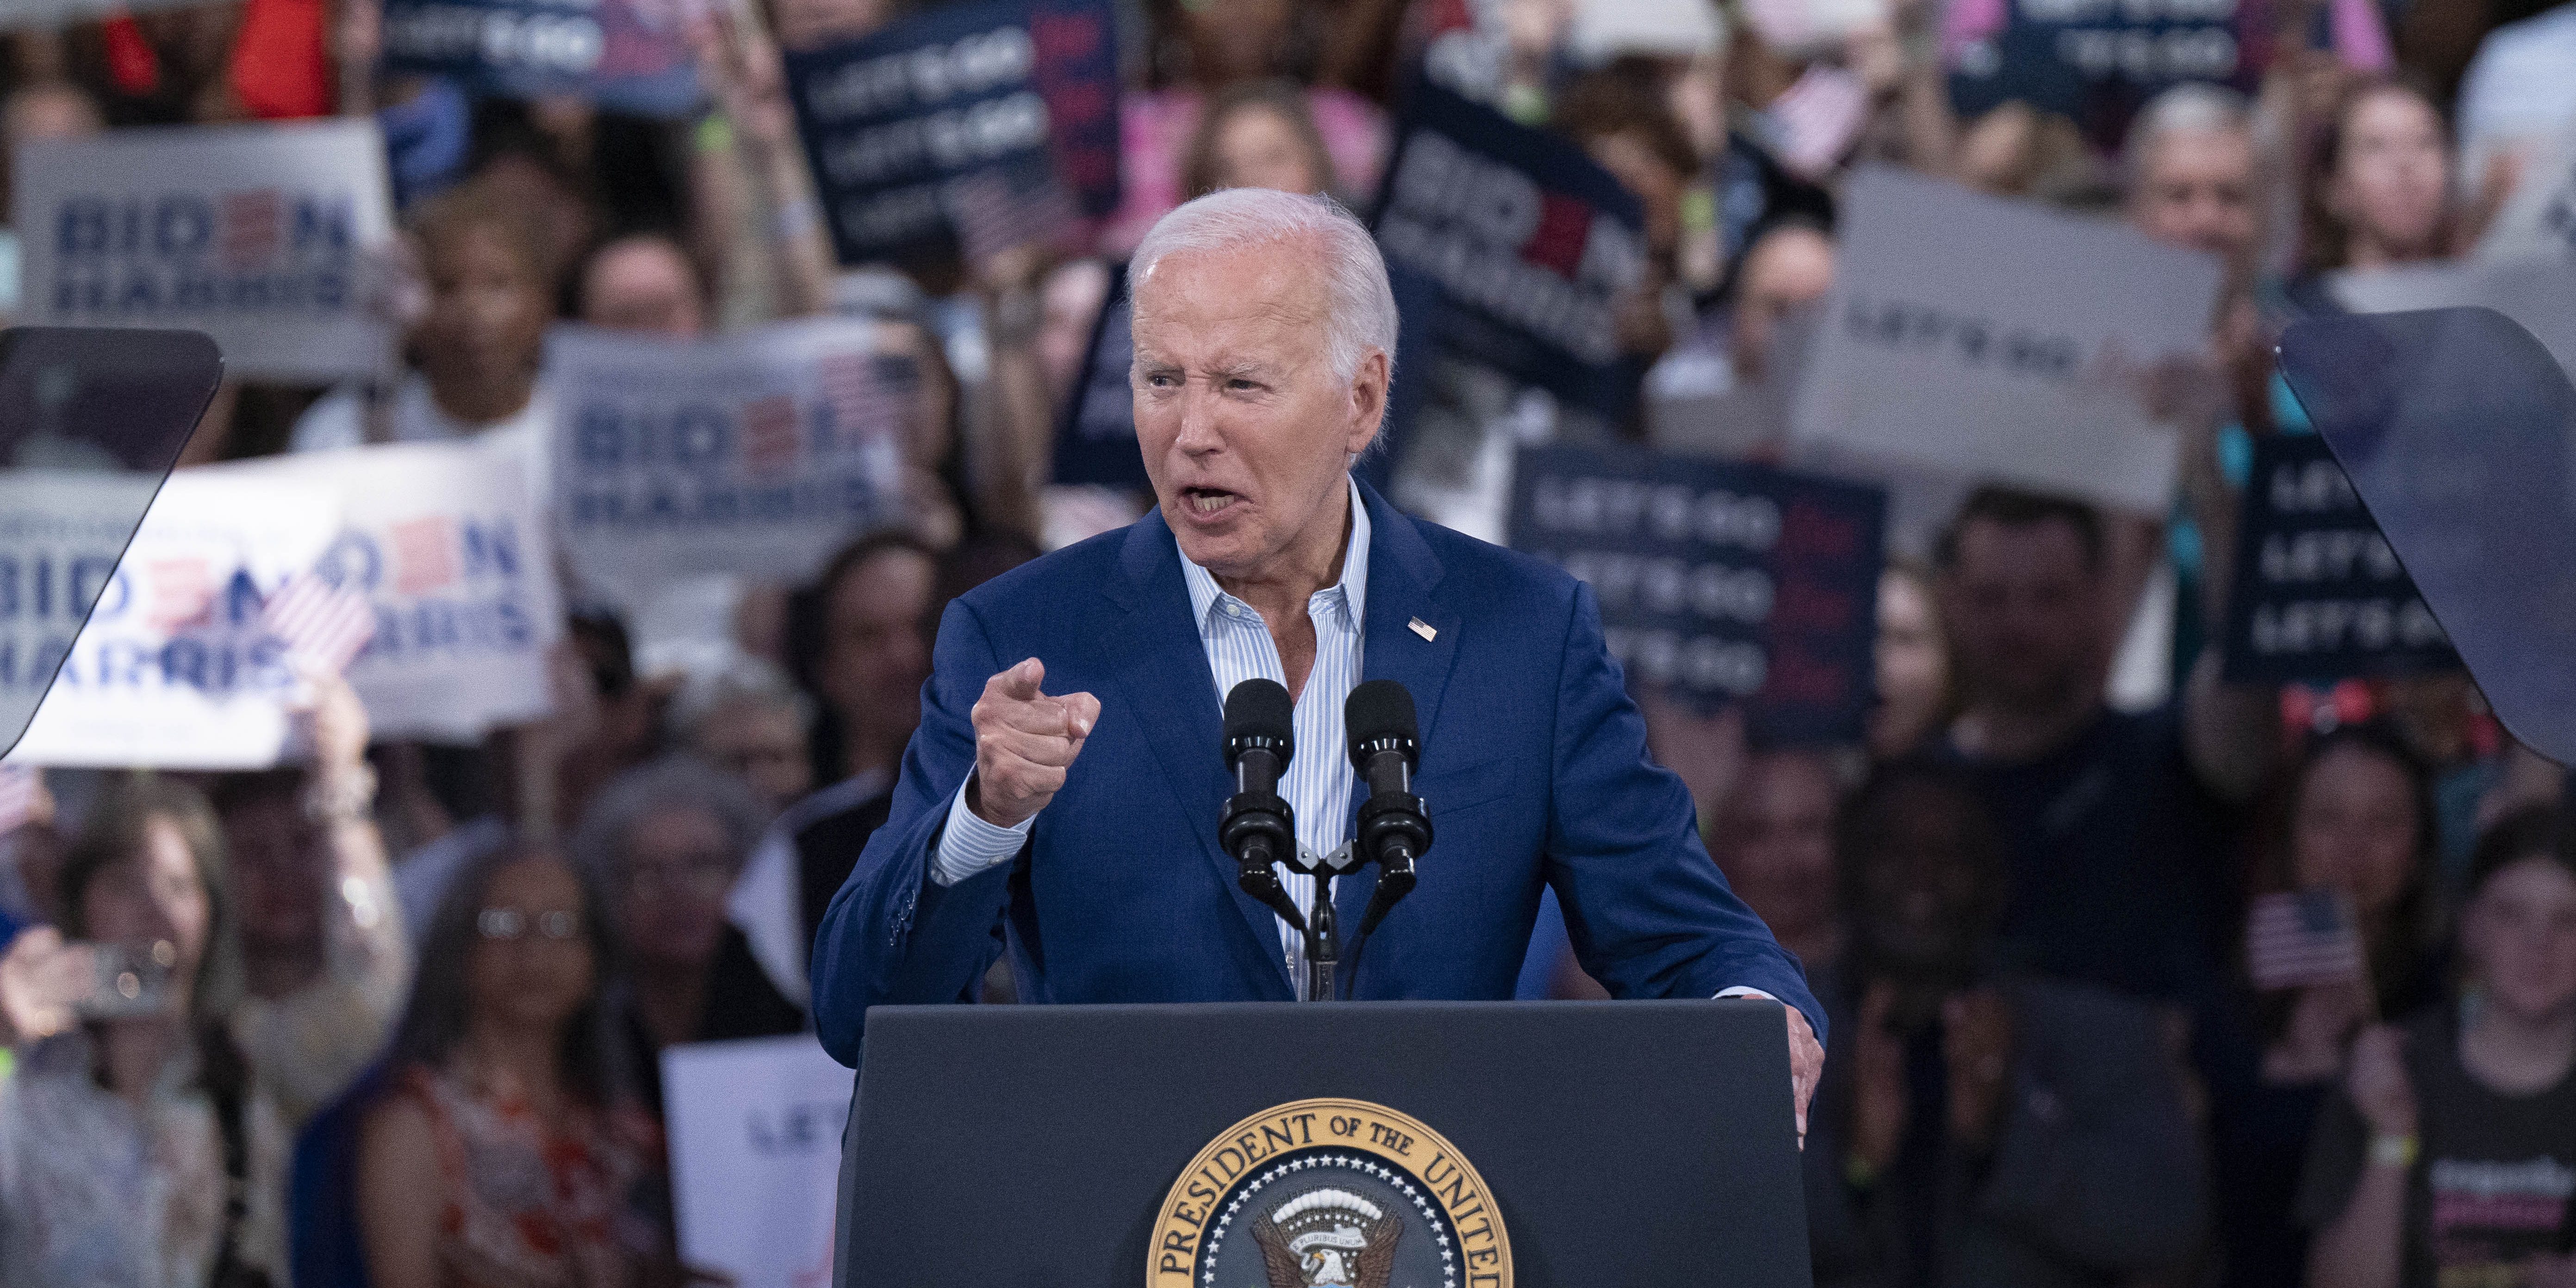 U.S. President Joe Biden speaks at a post-debate campaign rally on June 28, 2024 in Raleigh, North Carolina. Last night President Biden and Republican presidential candidate, former U.S. President Donald Trump faced off in the first presidential debate of the 2024 campaign. (Photo by Allison Joyce/Getty Images)